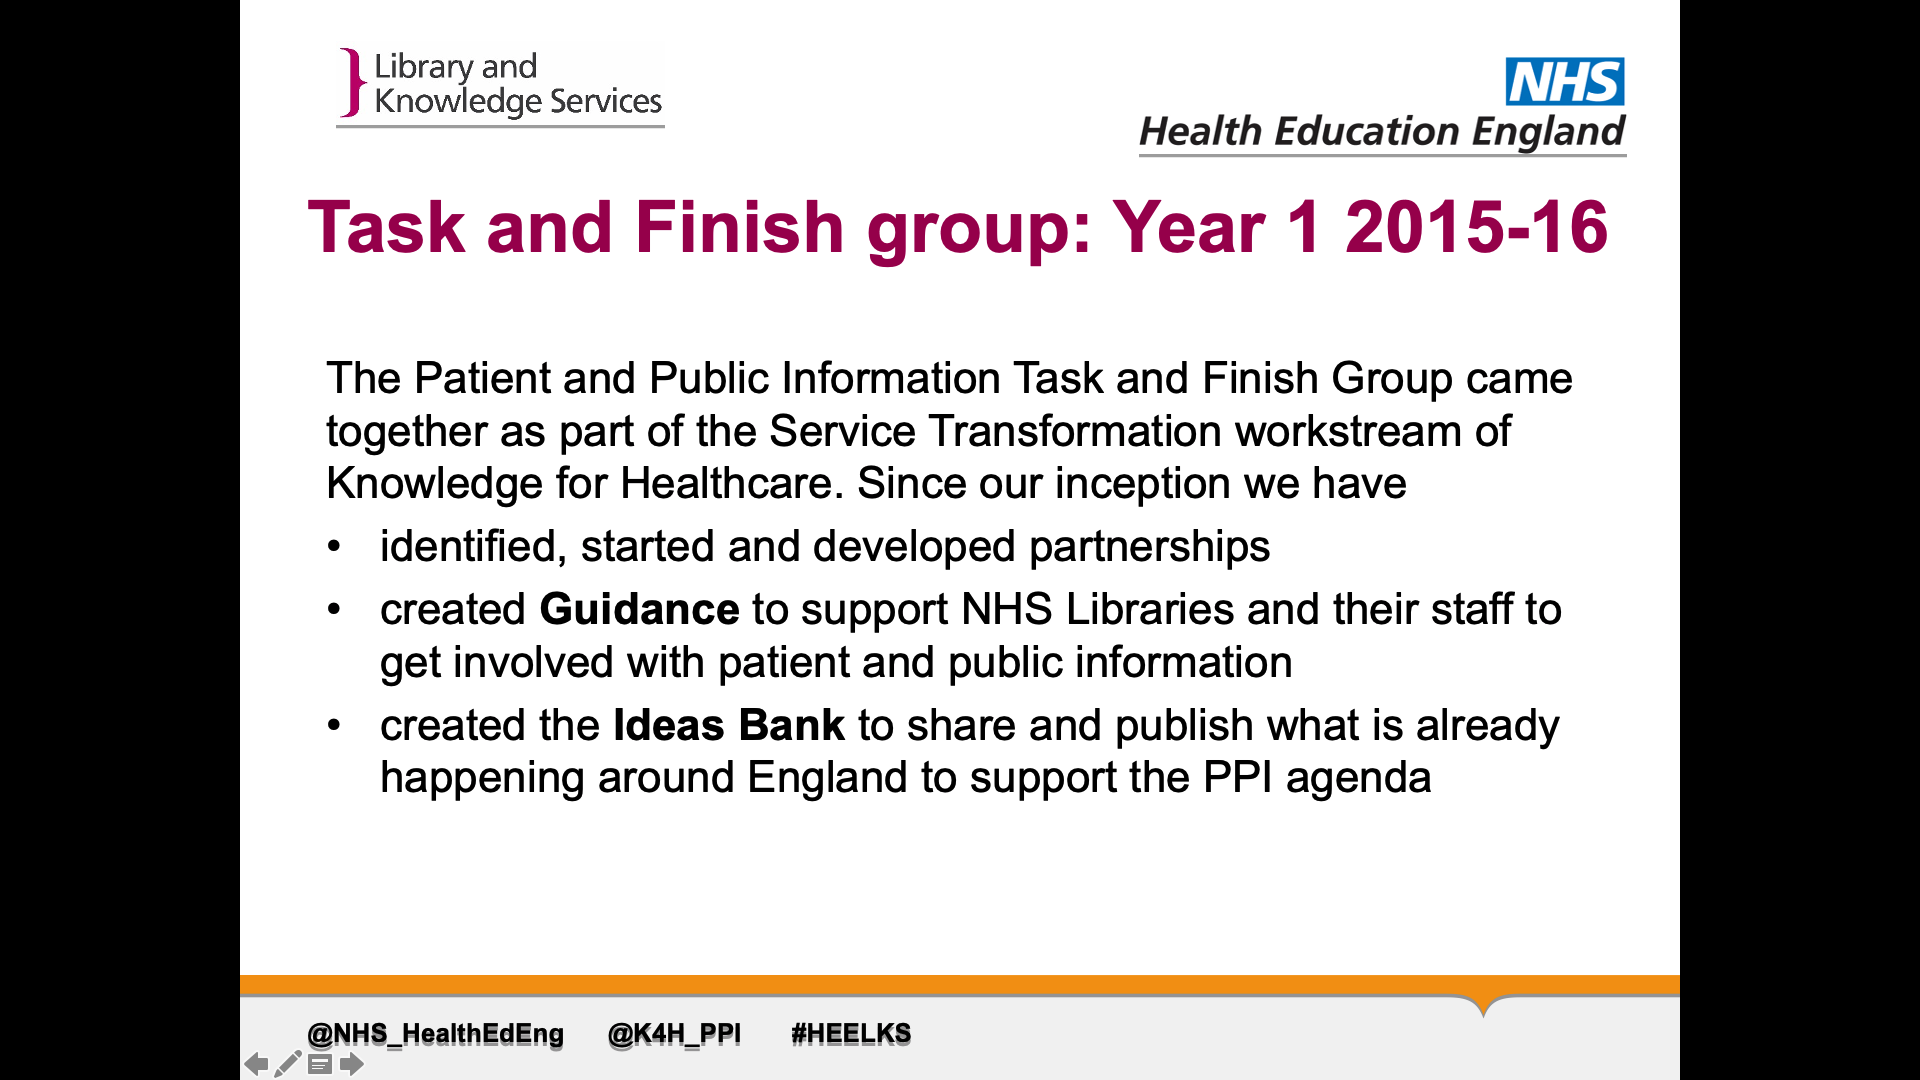 Title: Task and Finish group: Year 1 2015-16 Text on page: The Patient and Public Information Task and Finish Group came together as part of the Service Transformation workstream of Knowledge for Healthcare. Since our inception we have: 1. identified, started and developed partnerships 2. created Guidance to support NHS Libraries and their staff to get involved with patient and public information 3. created the Ideas Bank to share and publish what is already happening around England to support the PPI agenda